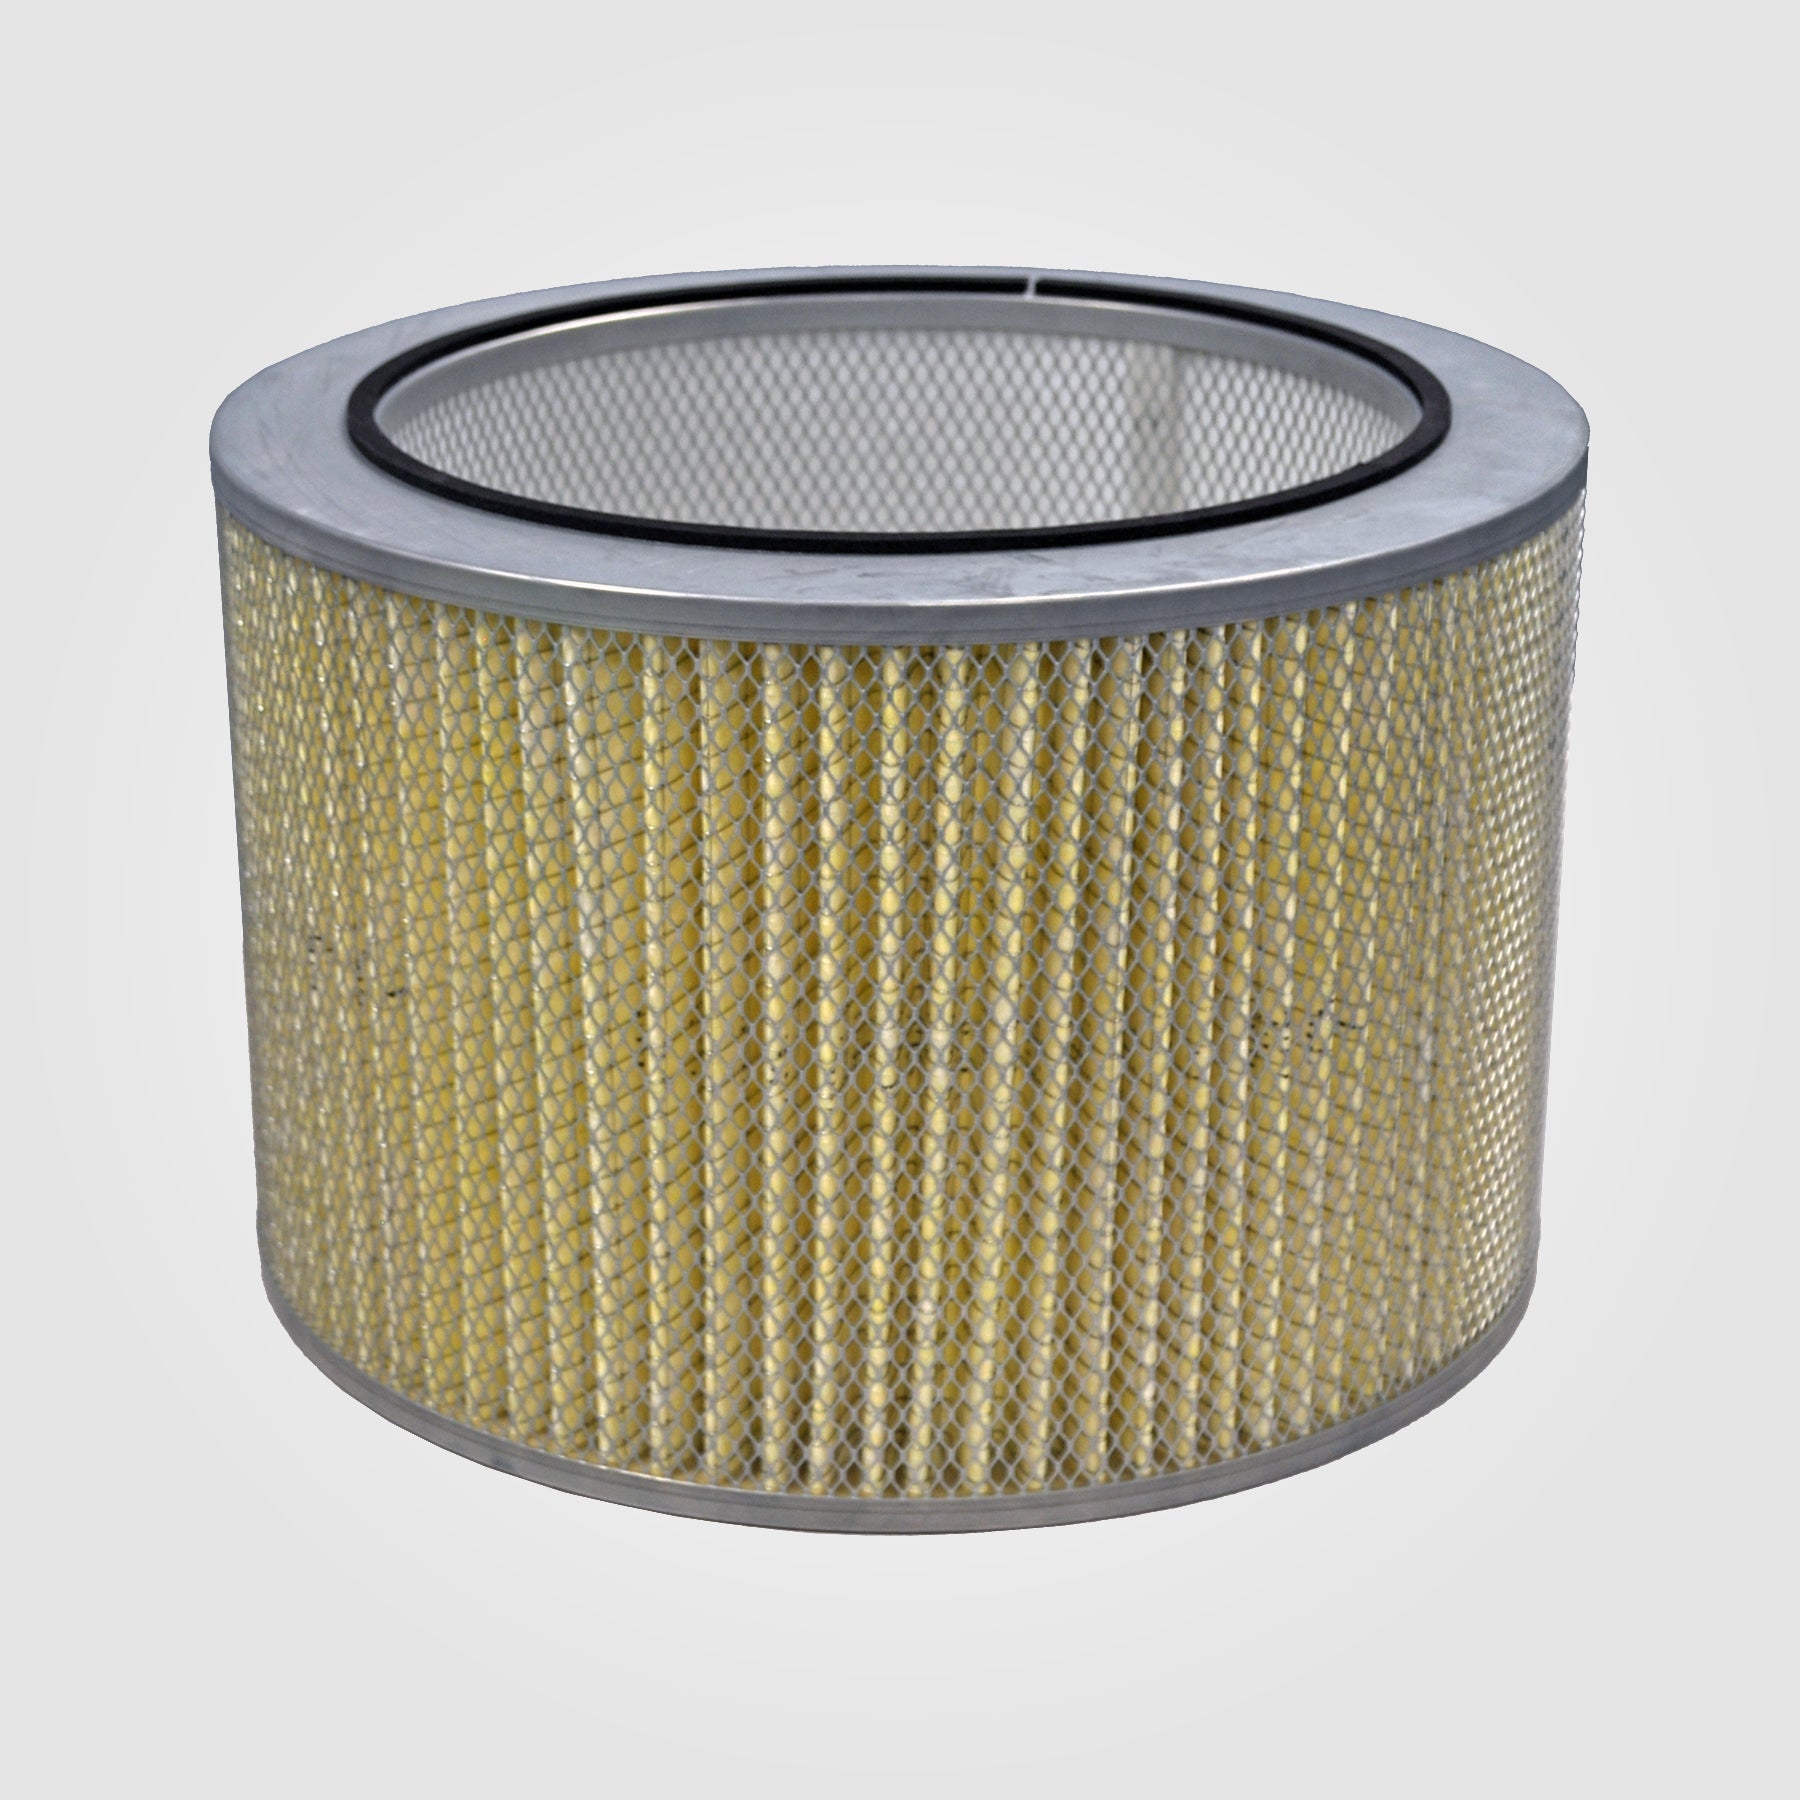 WS2 170 Filters